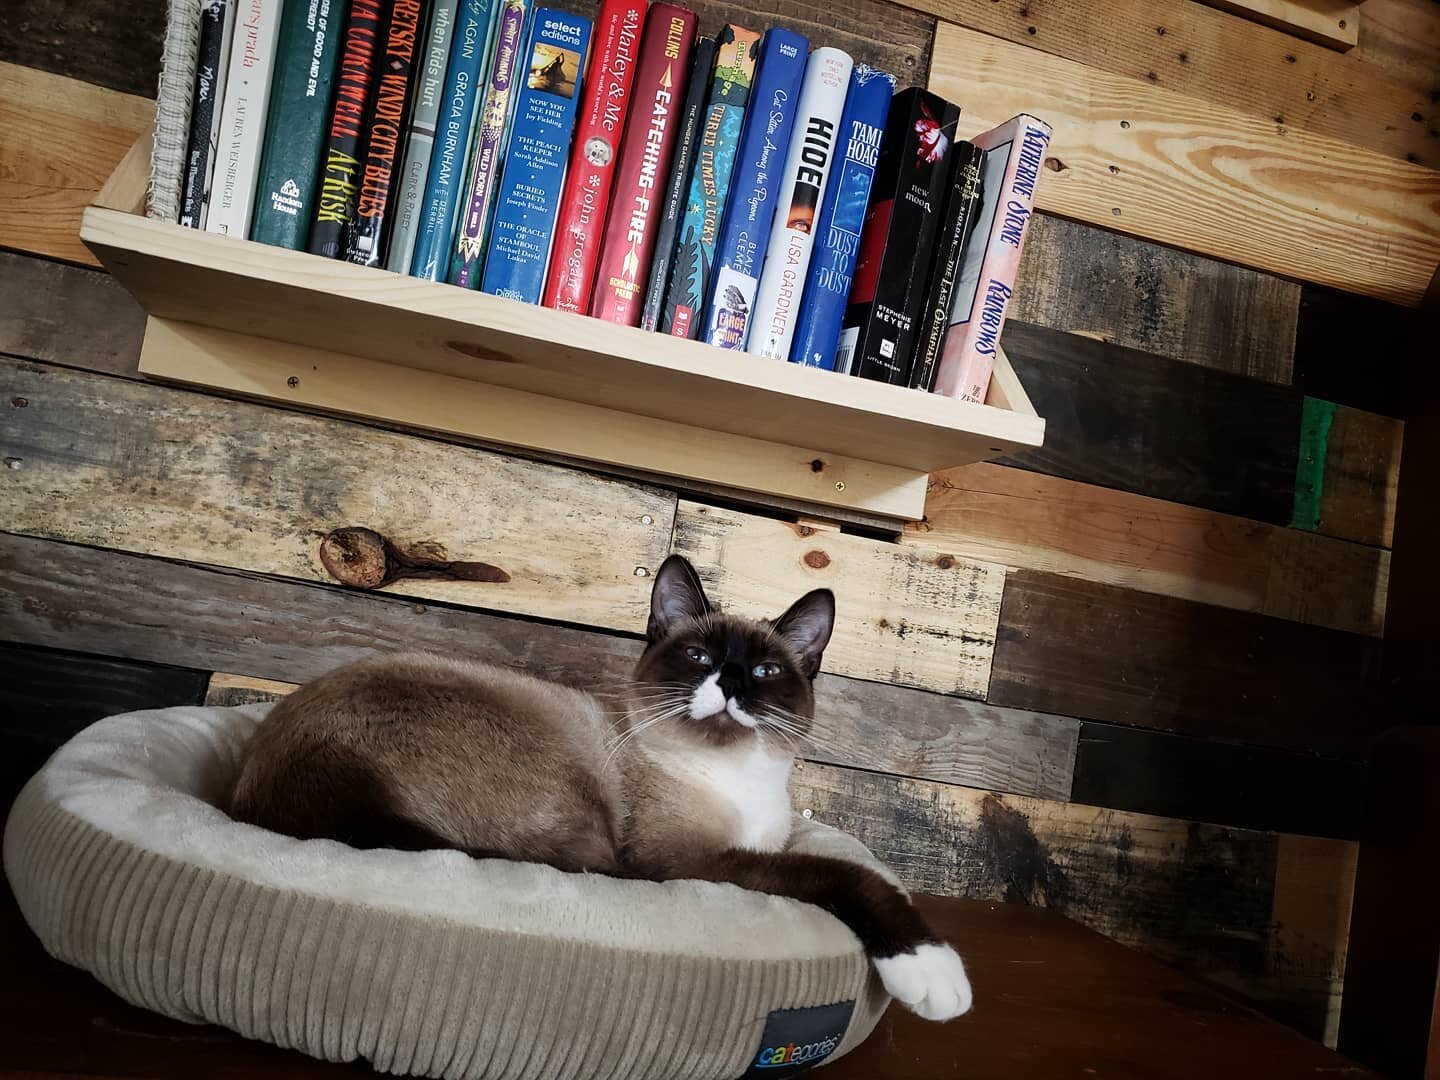 Shae has made herself right at home.

🐈 Visit us this week ➡️ LINK IN THE BIO 

#NineLivesCatLounge #cats #catsofinstagram #cat #catstagram #catlover #catlife #instacat #meow #kittens #catoftheday #cutecats #lovecats #catlounge #417local #417land #J